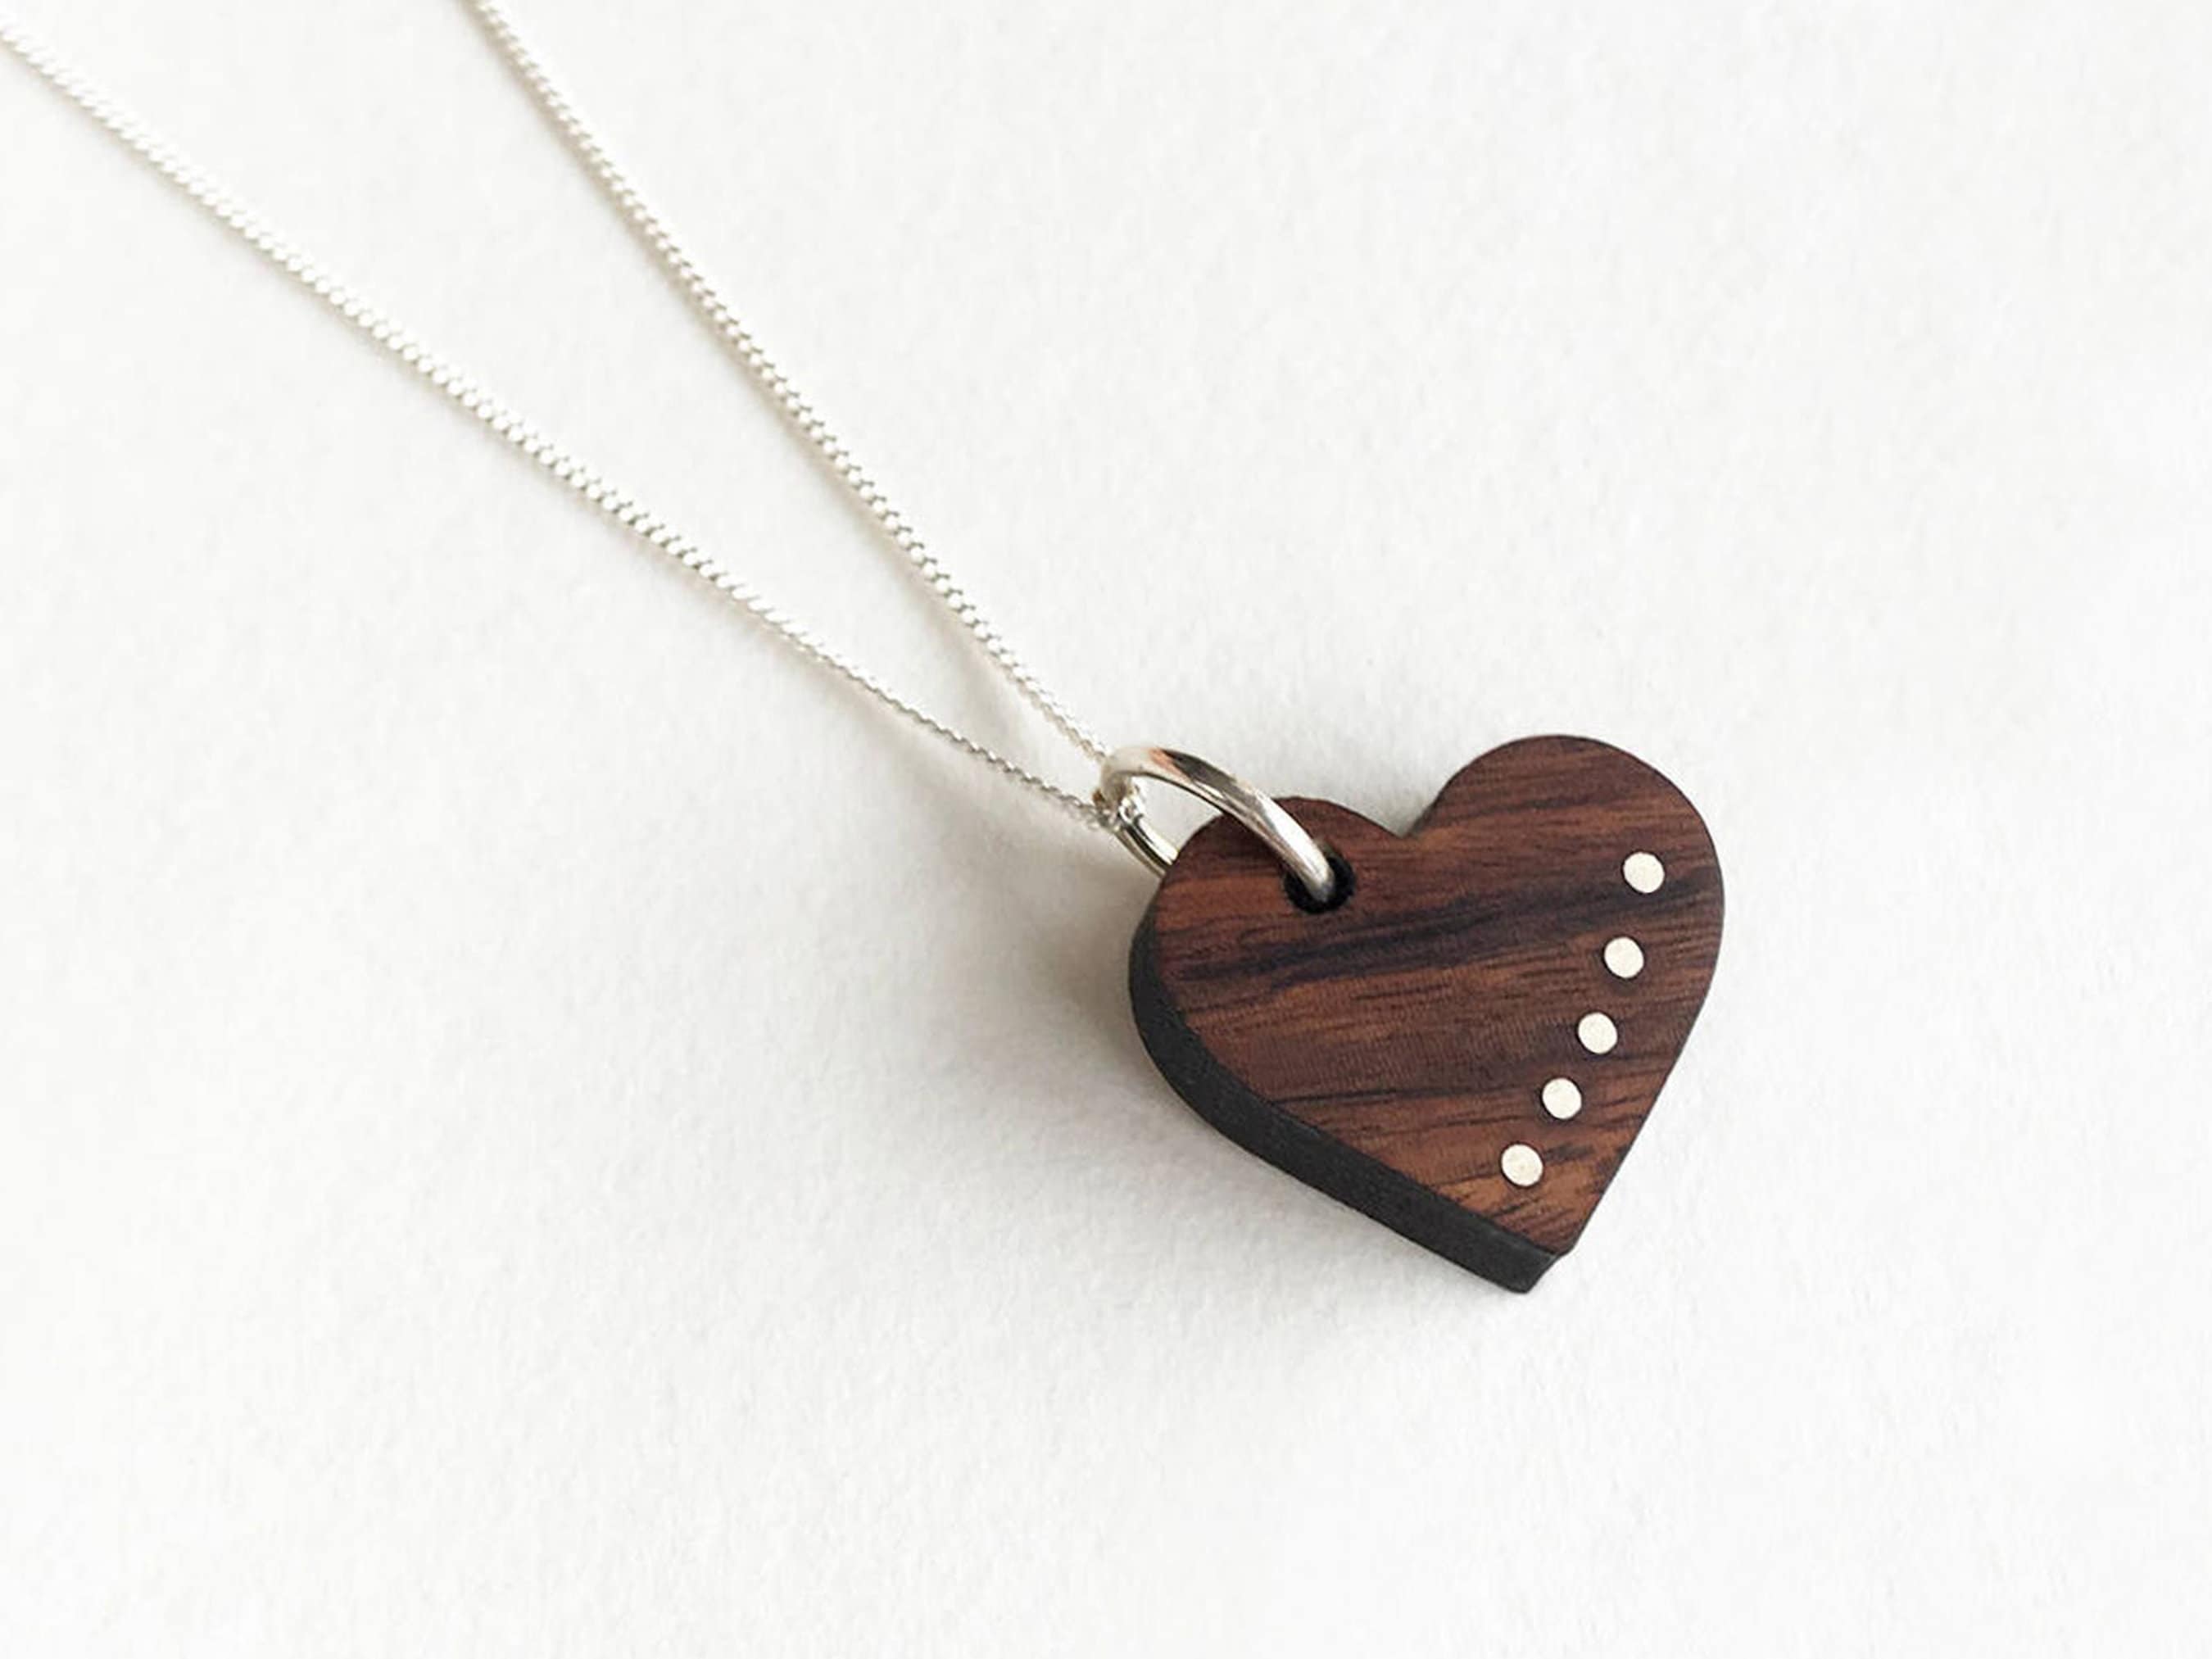 5th Anniversary Gift for Wife Wood Heart Necklace Wooden